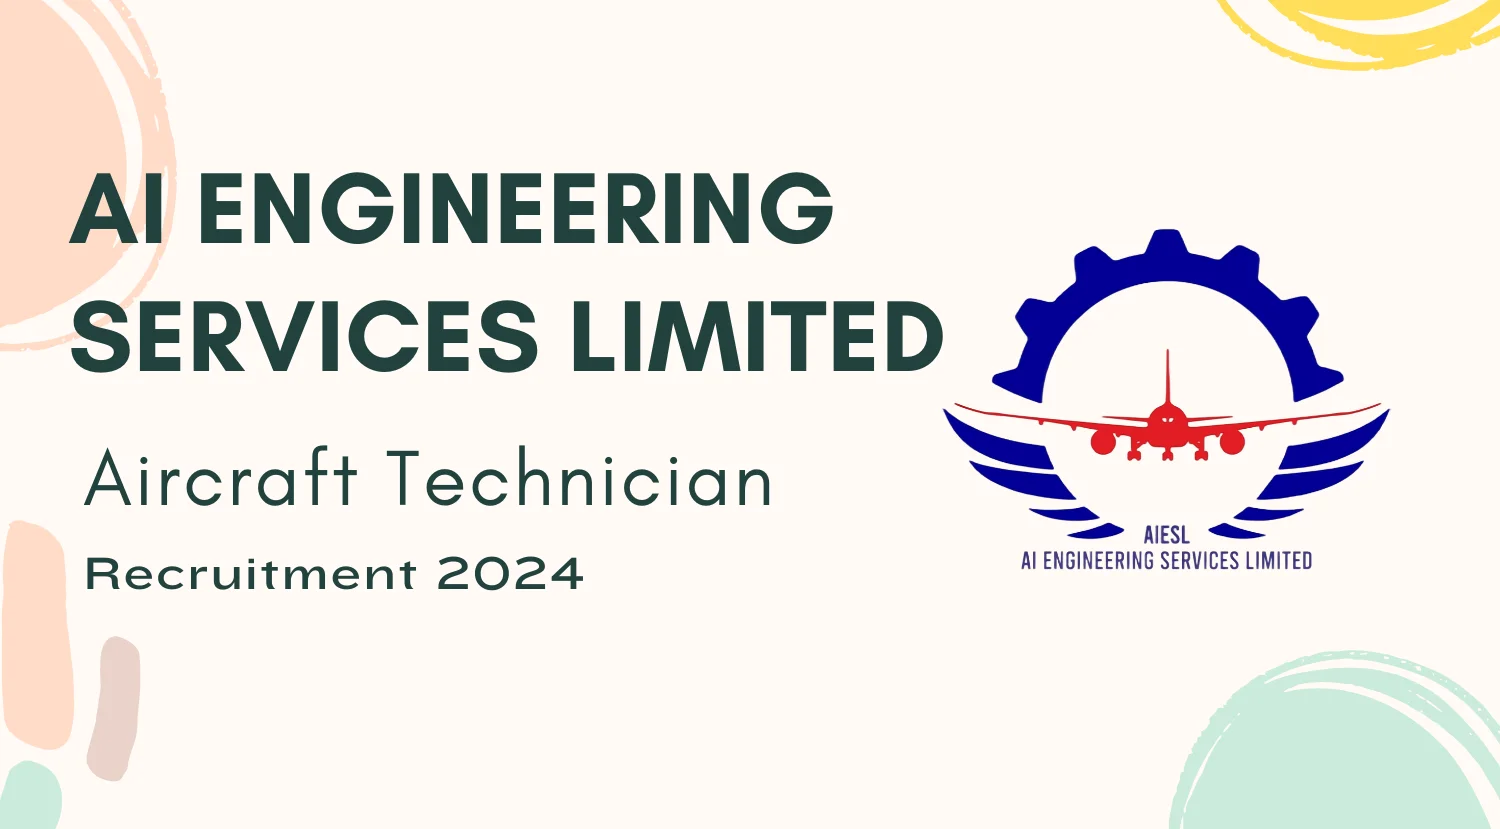 AIESL AI EngineeringServices Limited